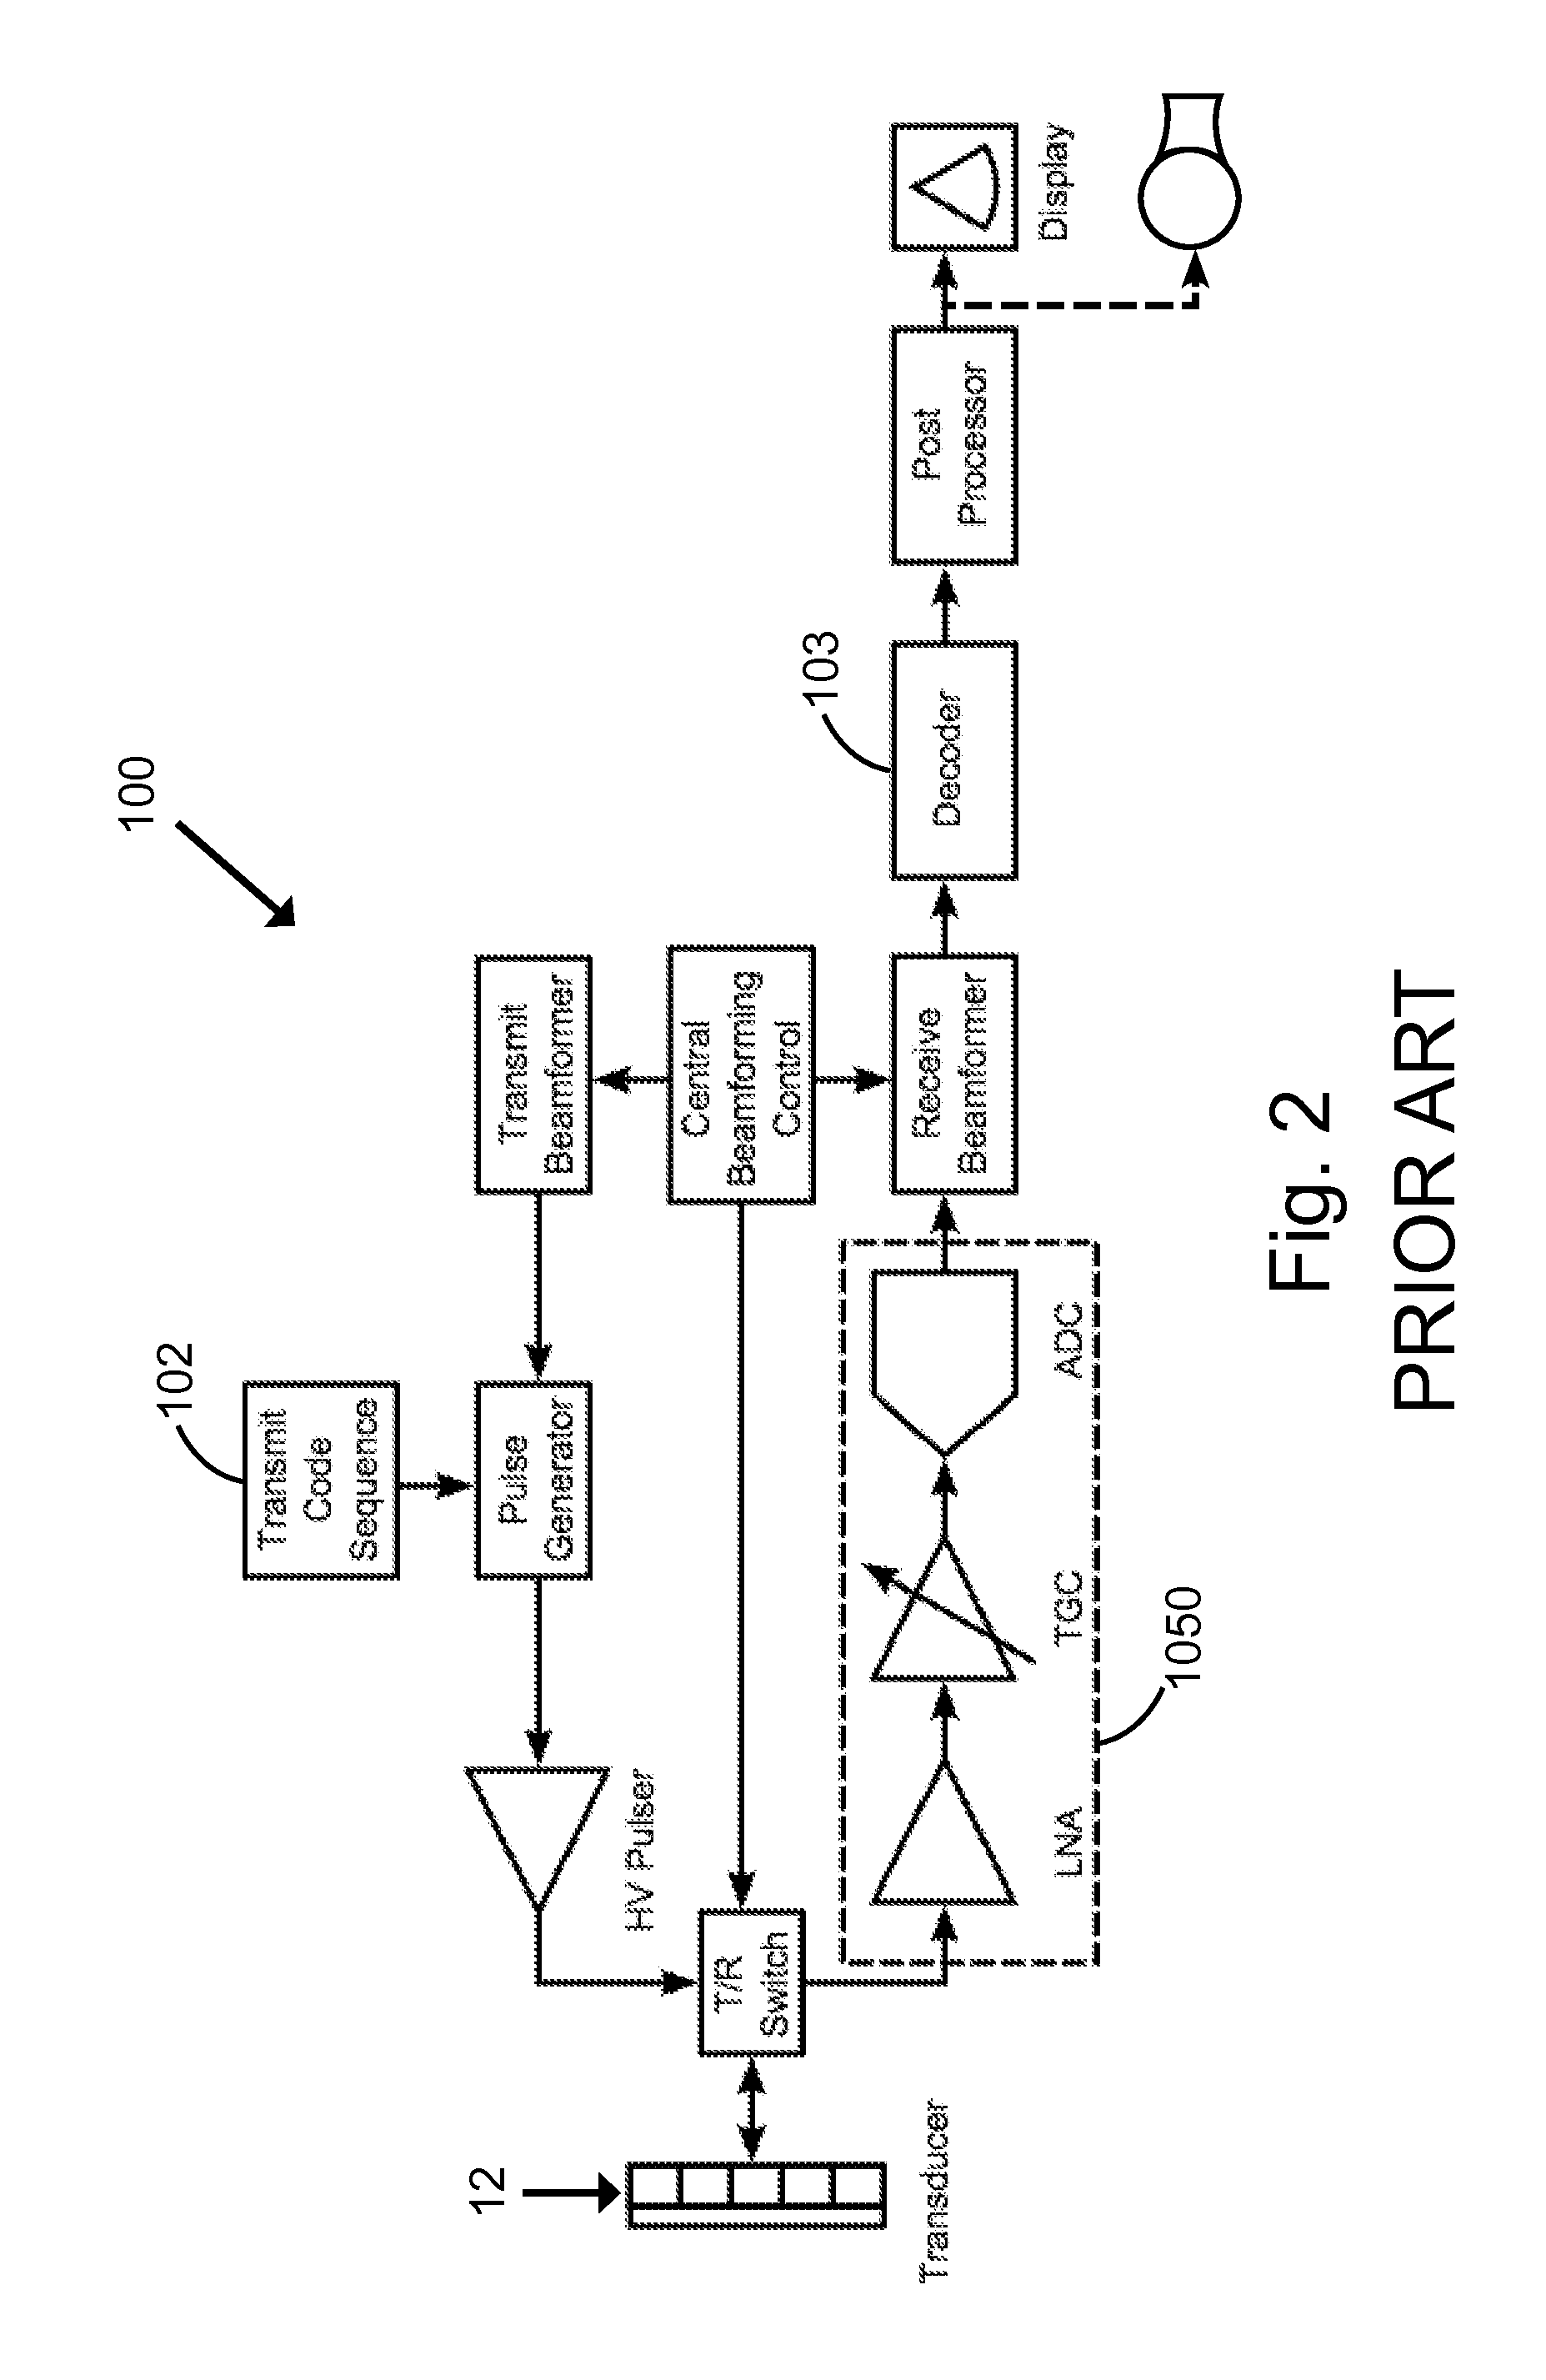 Front end circuitry for imaging systems and methods of use